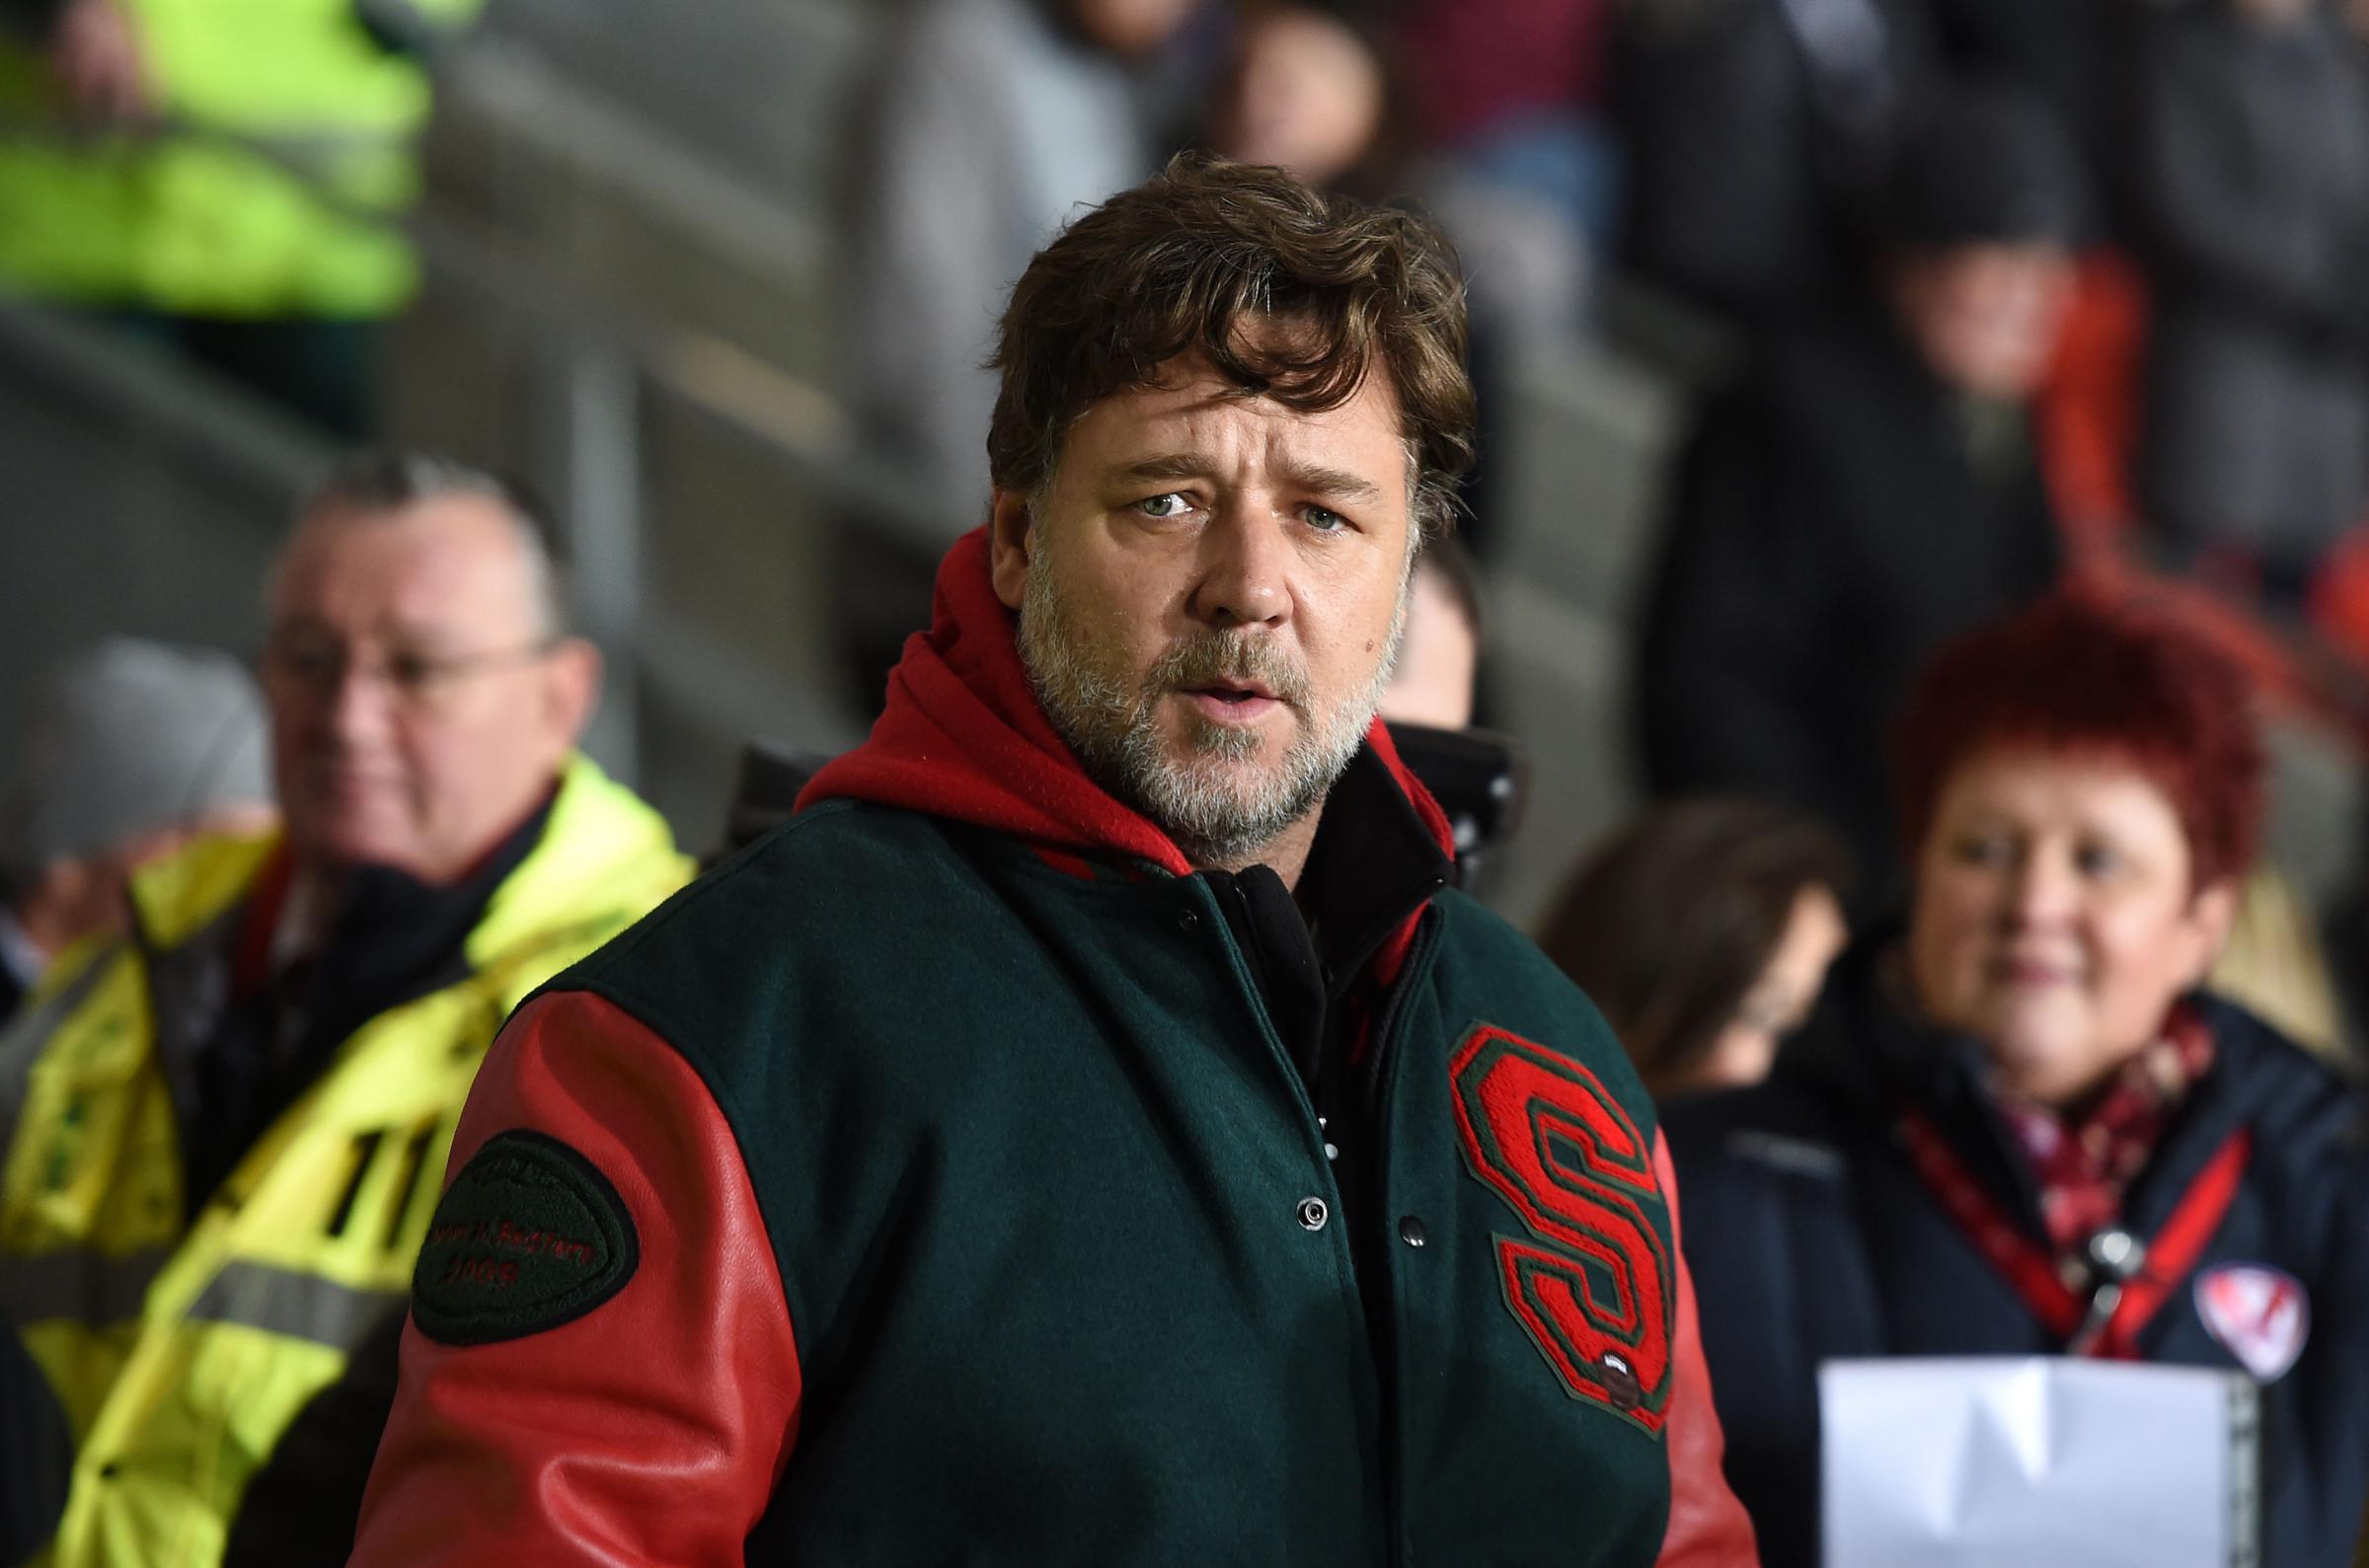 Russell Crowe visiting St Helens with his South Sydney side in 2015. Picture: PA